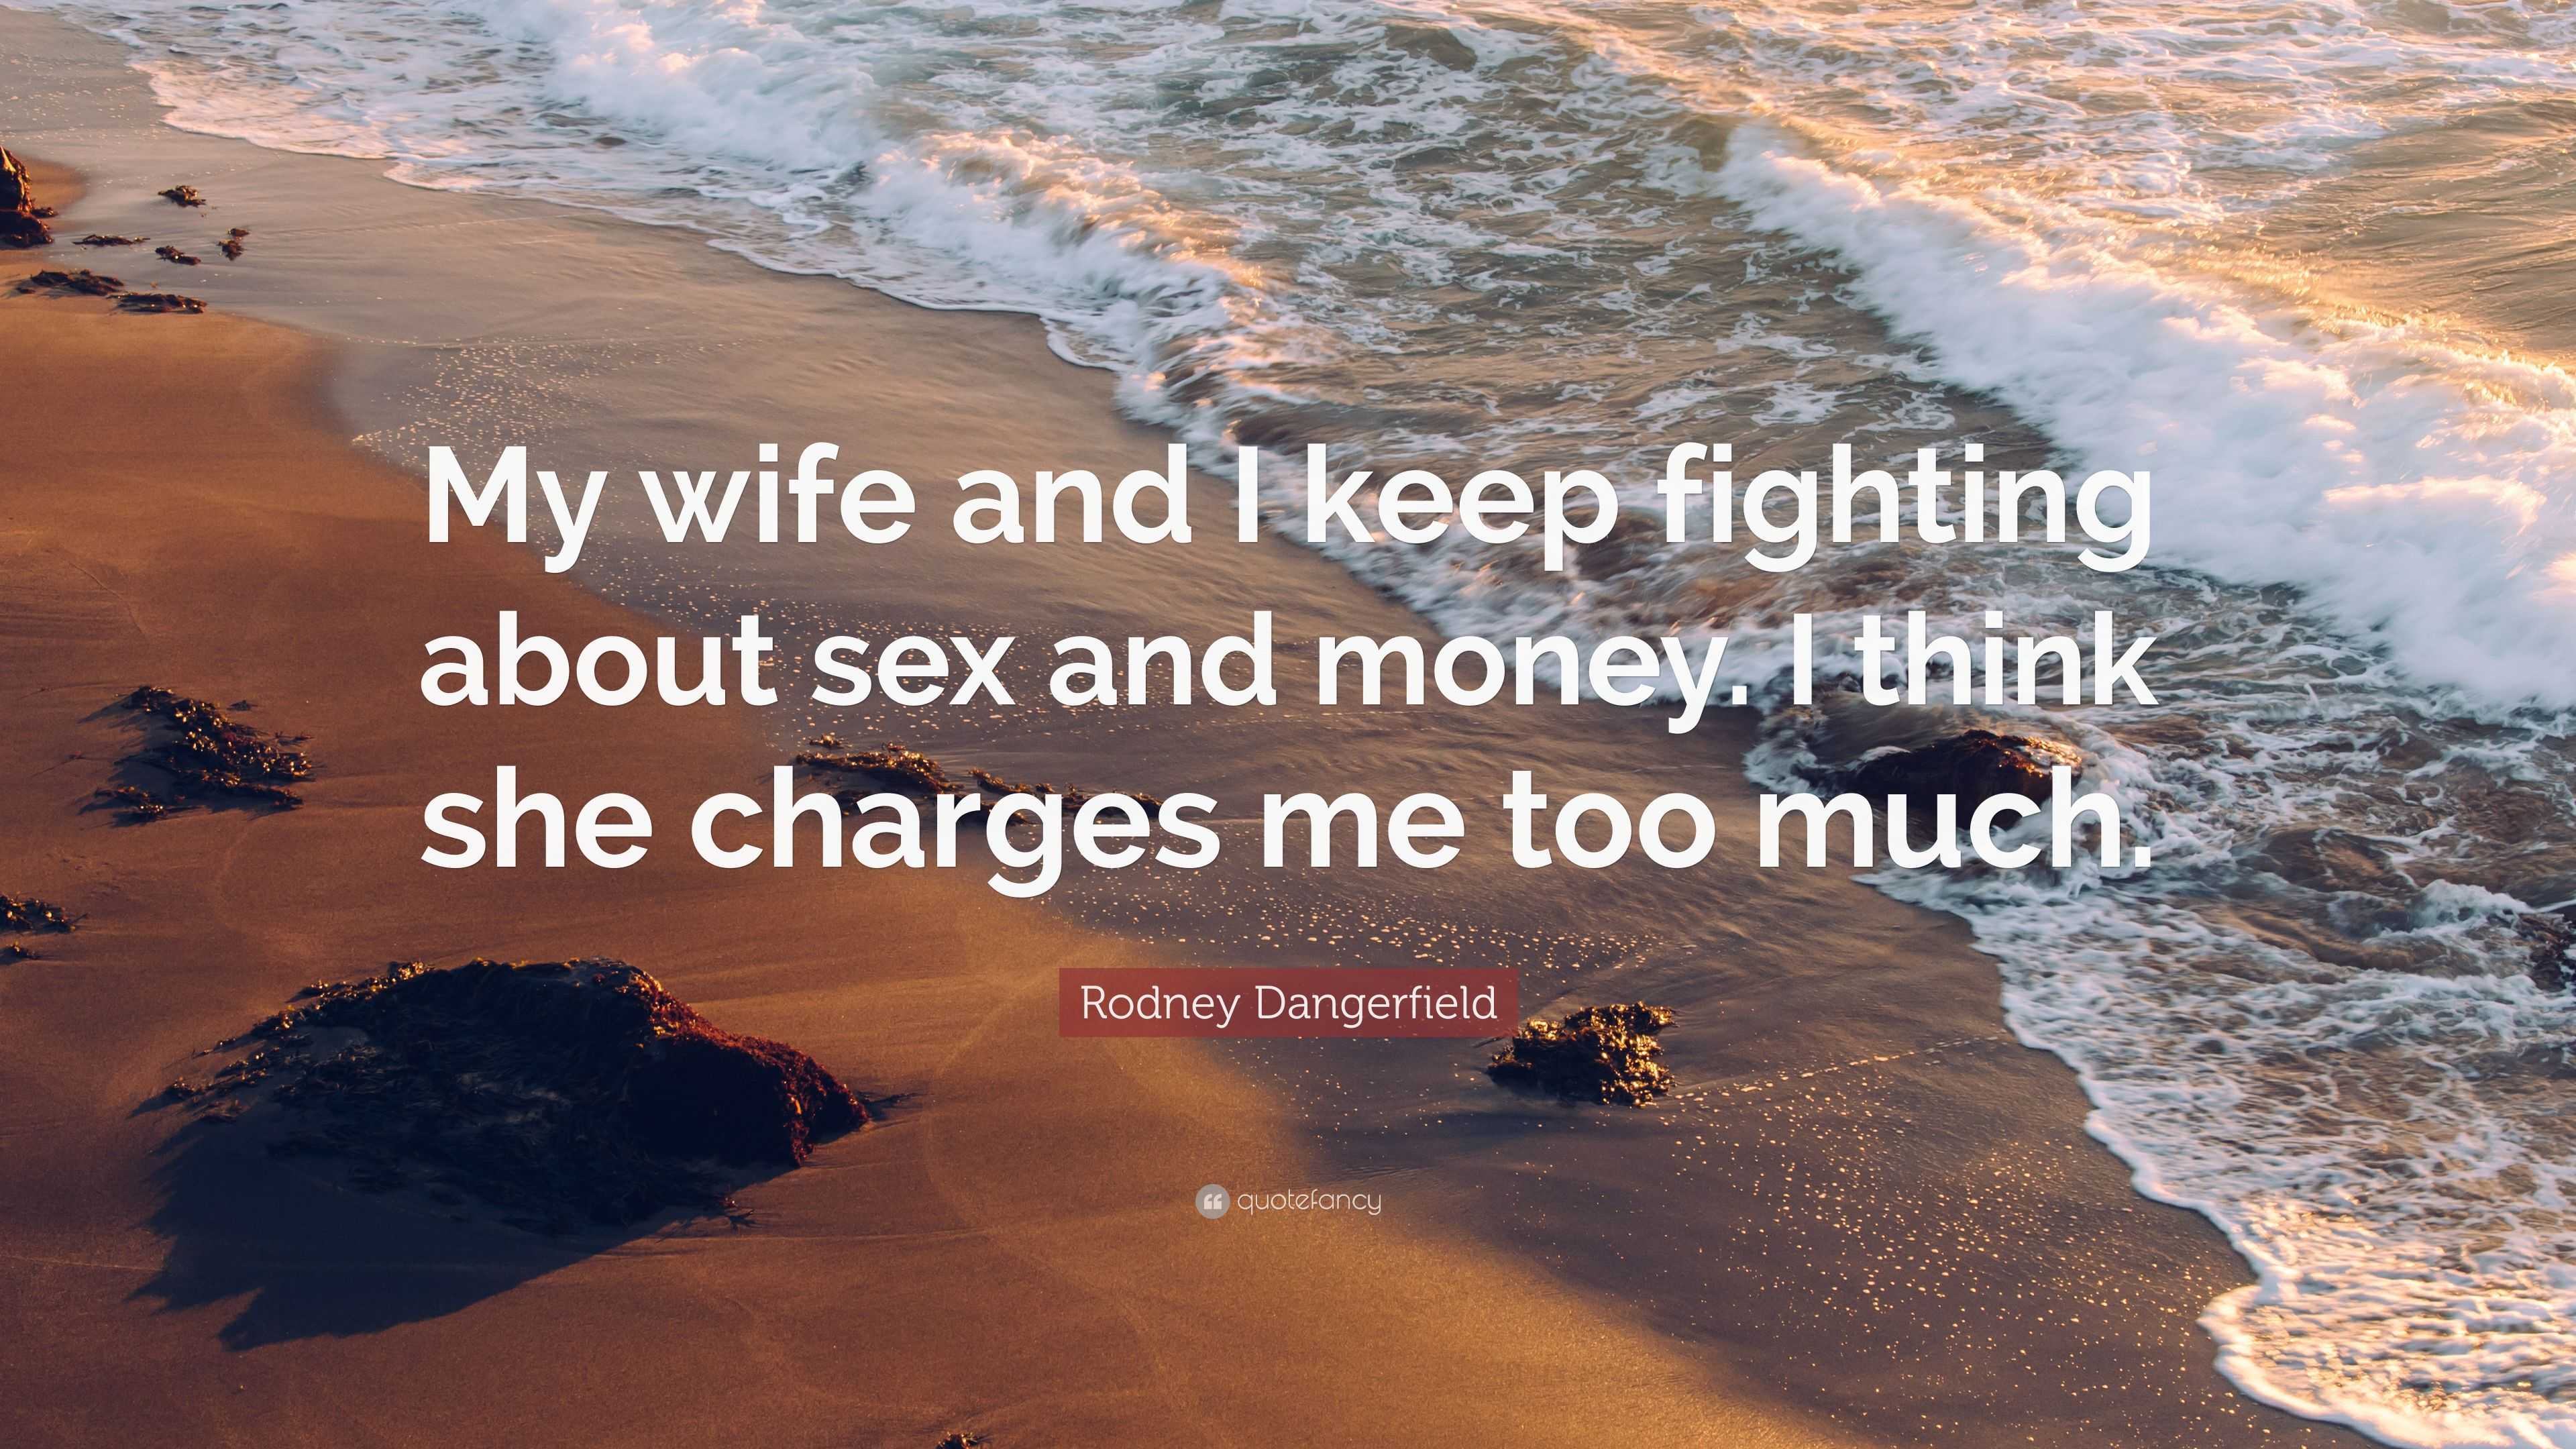 Rodney Dangerfield Quote “My wife and I keep fighting about sex and money image